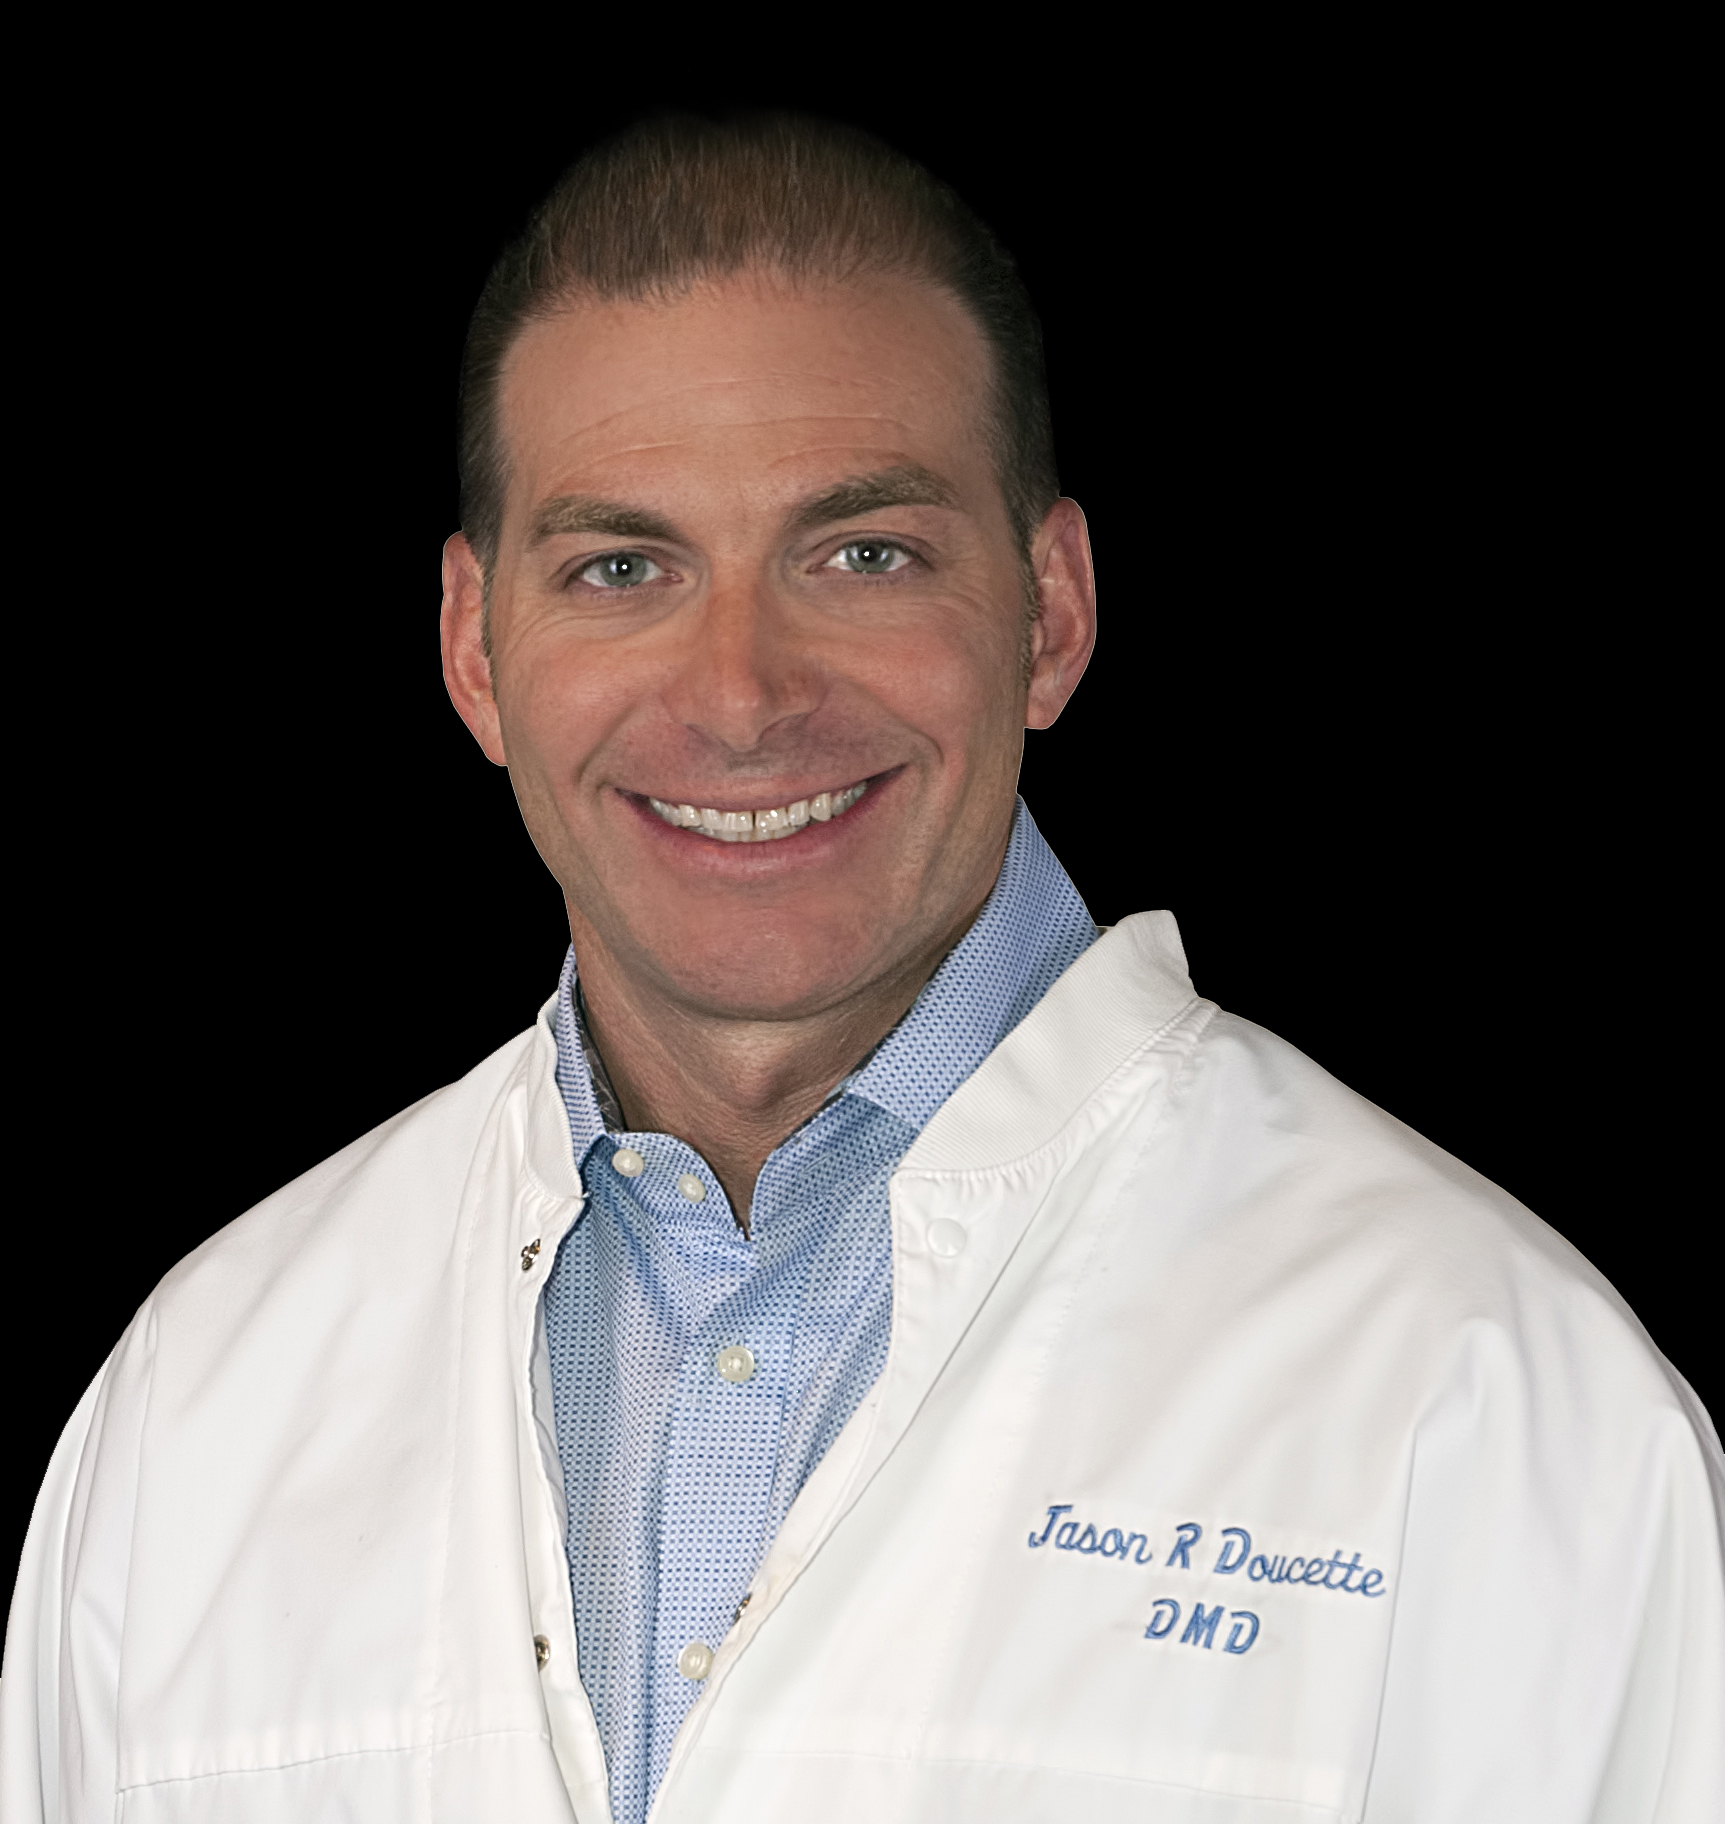 Dr. Jason Doucette joins Caffaratti Dental Group, serving the greater Reno, Nev., area.